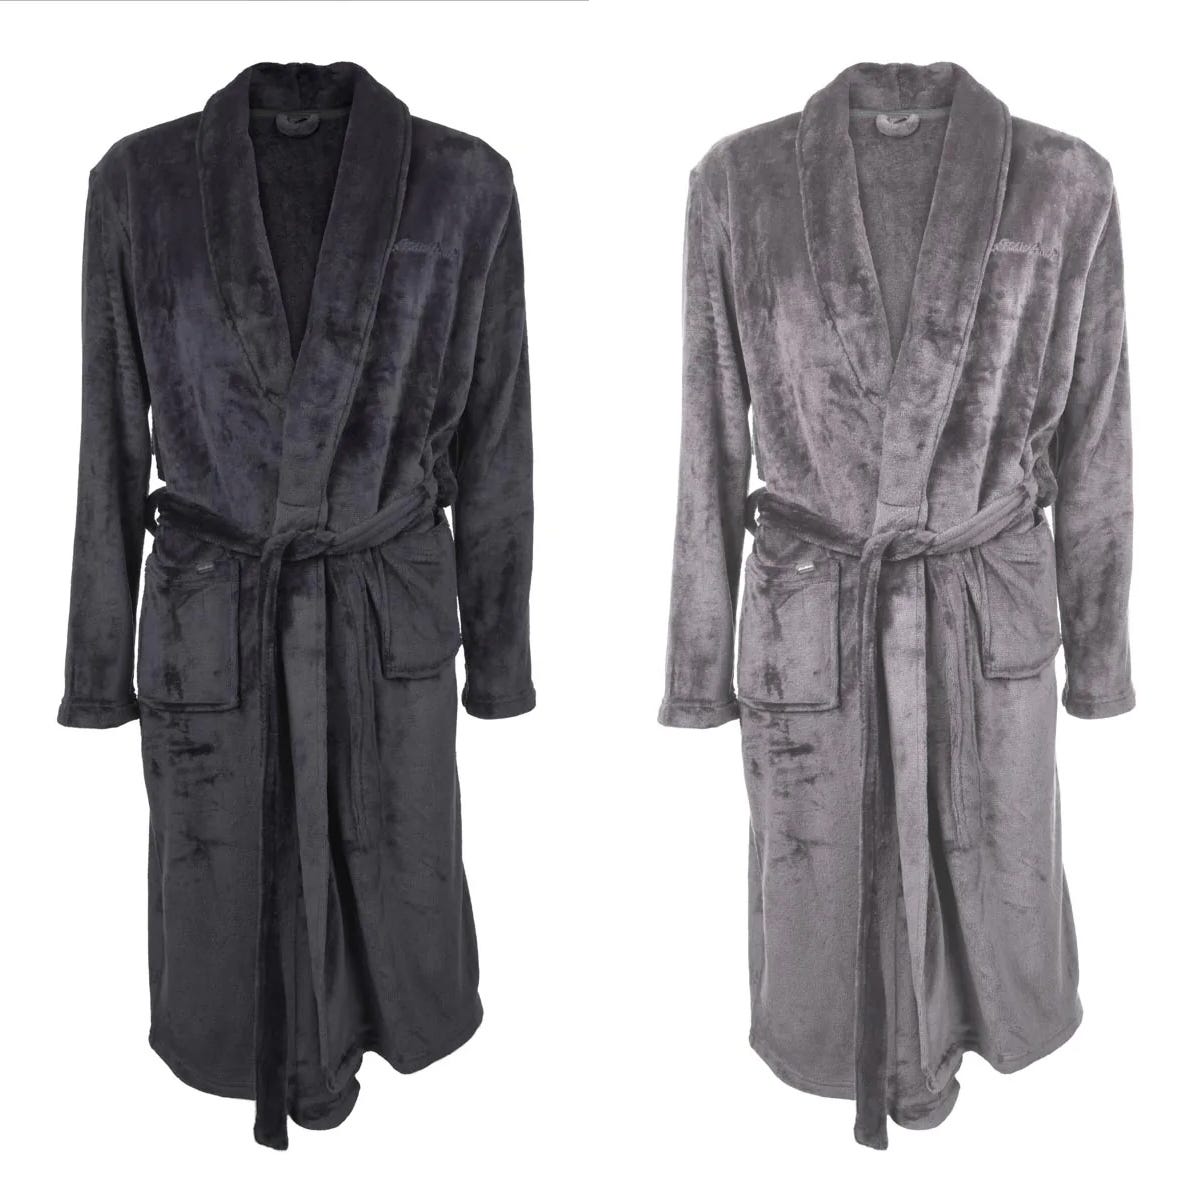 Two plush bathrobes displayed in dark and light grey colors, featuring a shawl collar and waist tie.